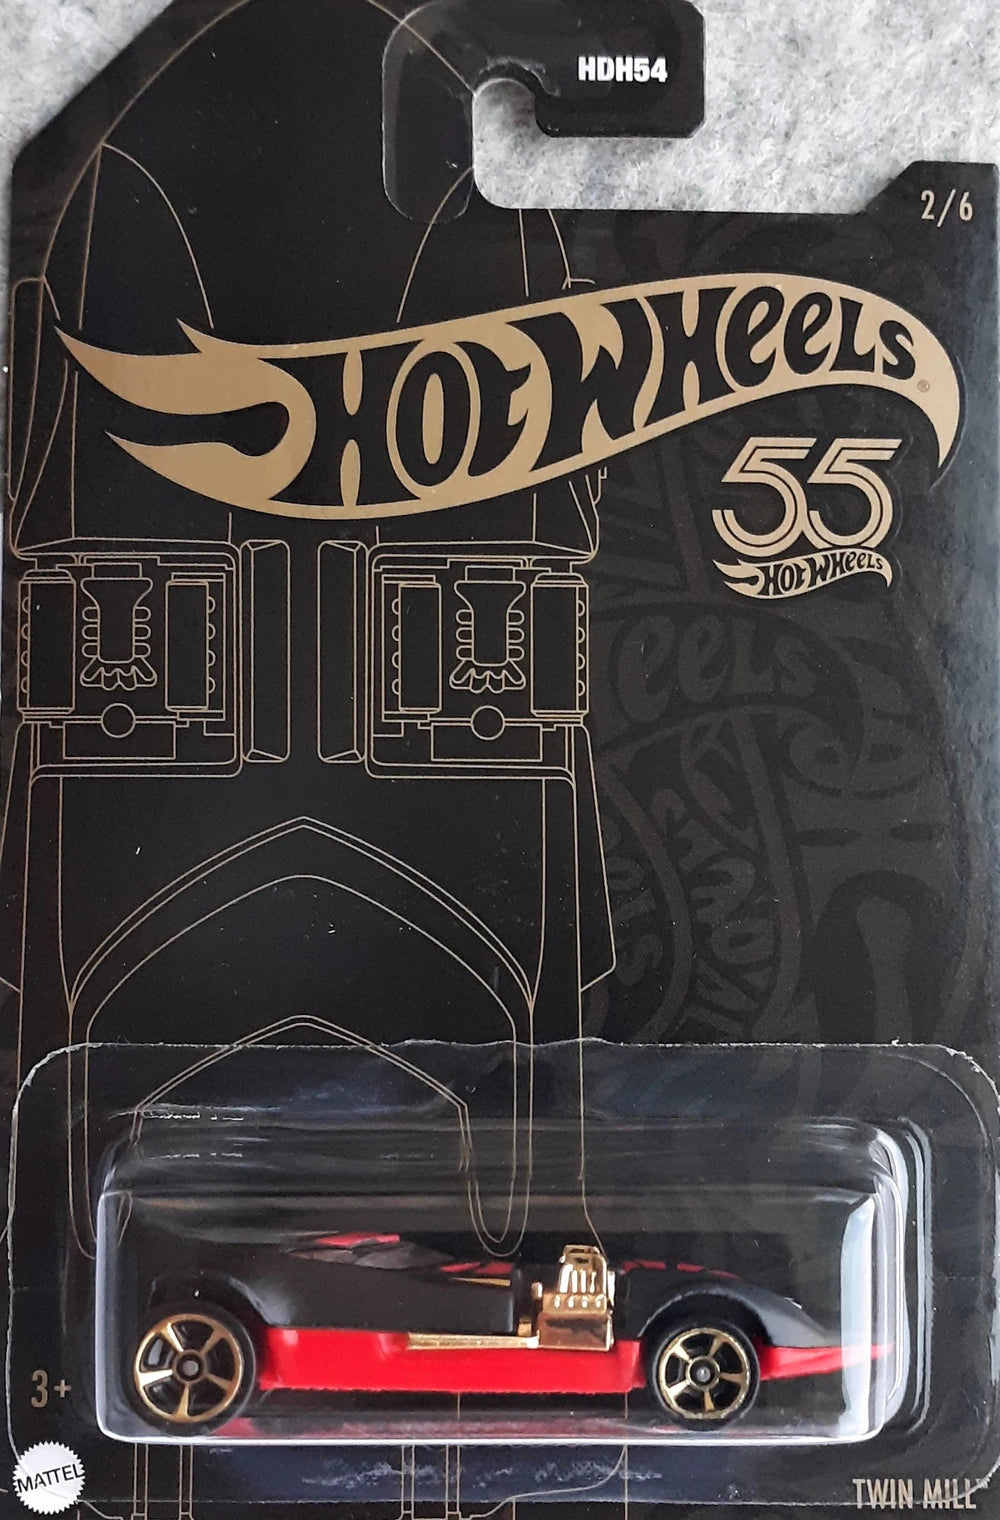 Mattel-Hot Wheels - 55th Anniversary Black and Yellow Series (2023) - Mix 2 - Twin Mill-HLK04-Legacy Toys